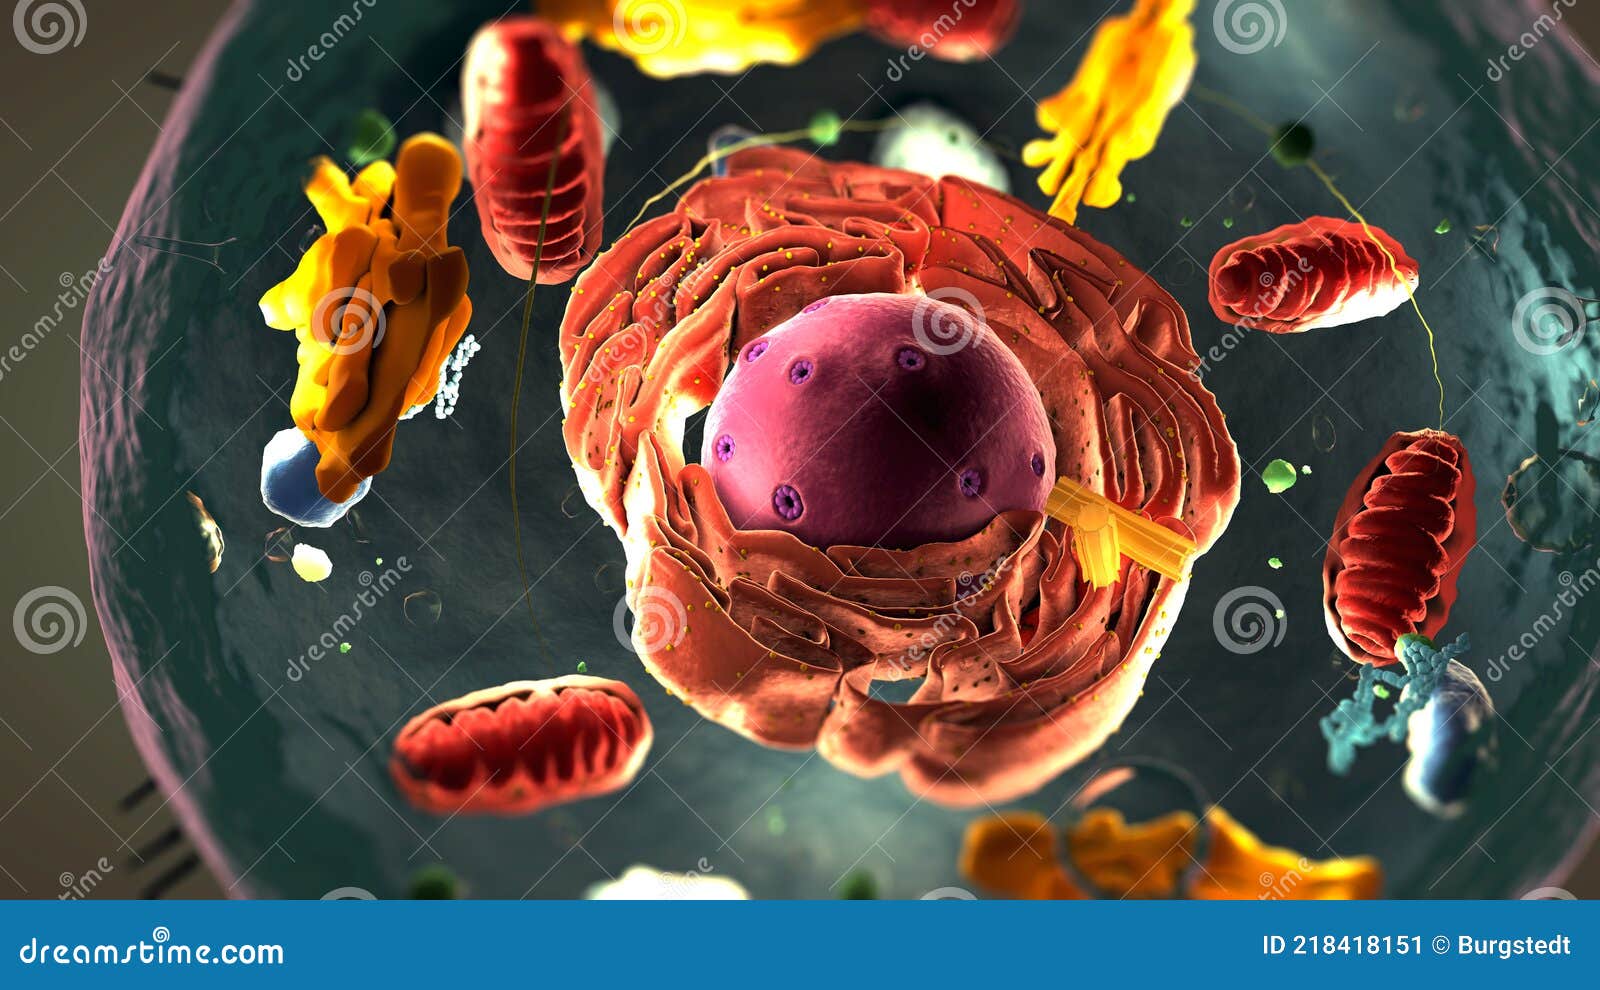 subunits inside eukaryotic cell, nucleus and organelles and plasma membrane